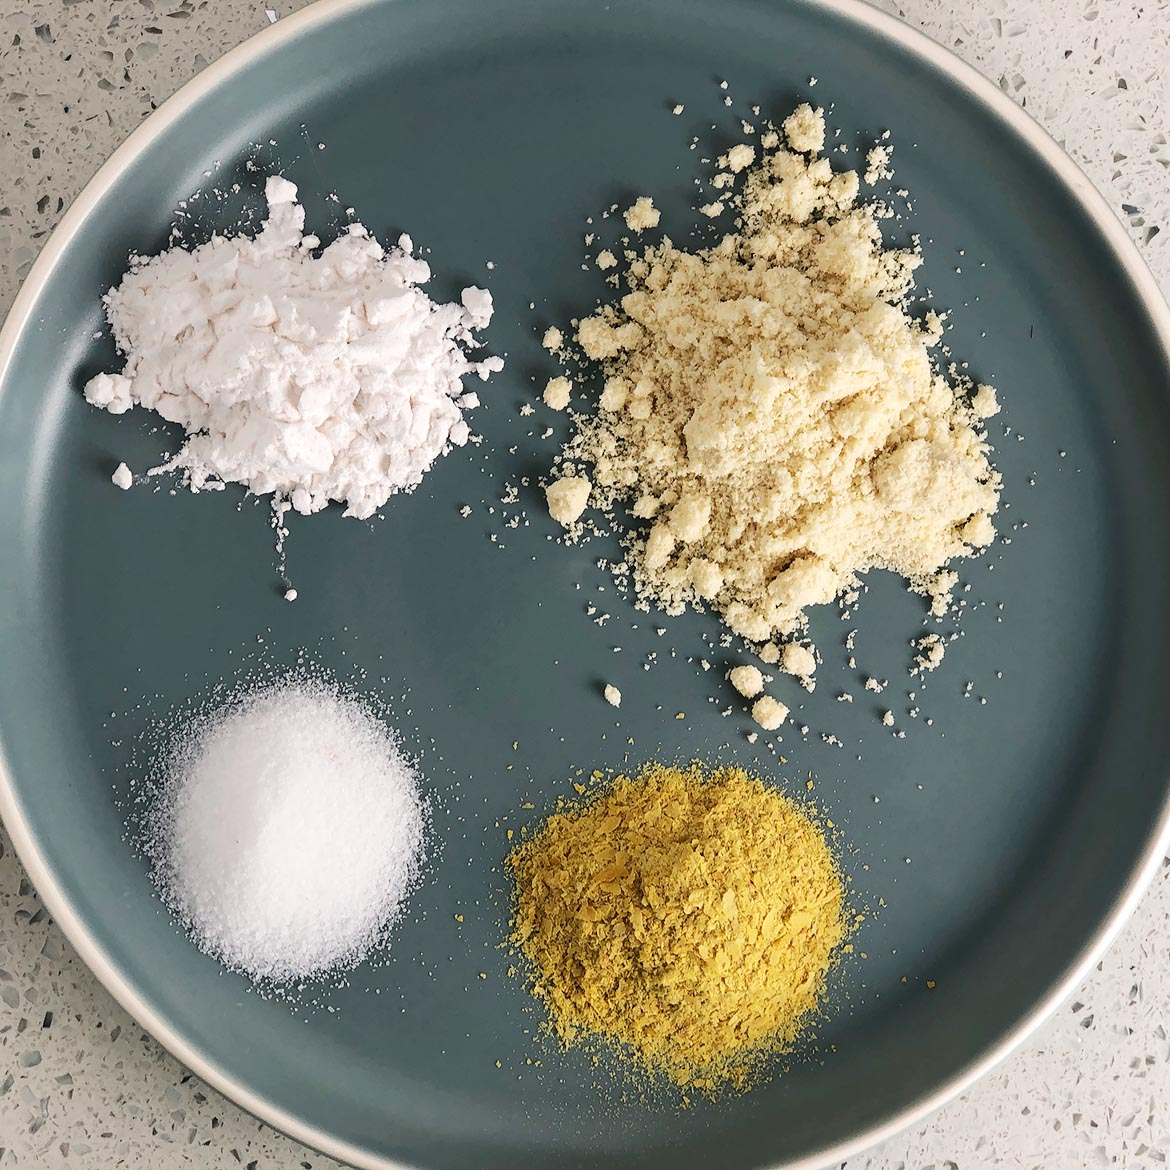 Top-down view of Mother Mix ingredients: tapioca starch, almond flour, nutritional yeast, salt